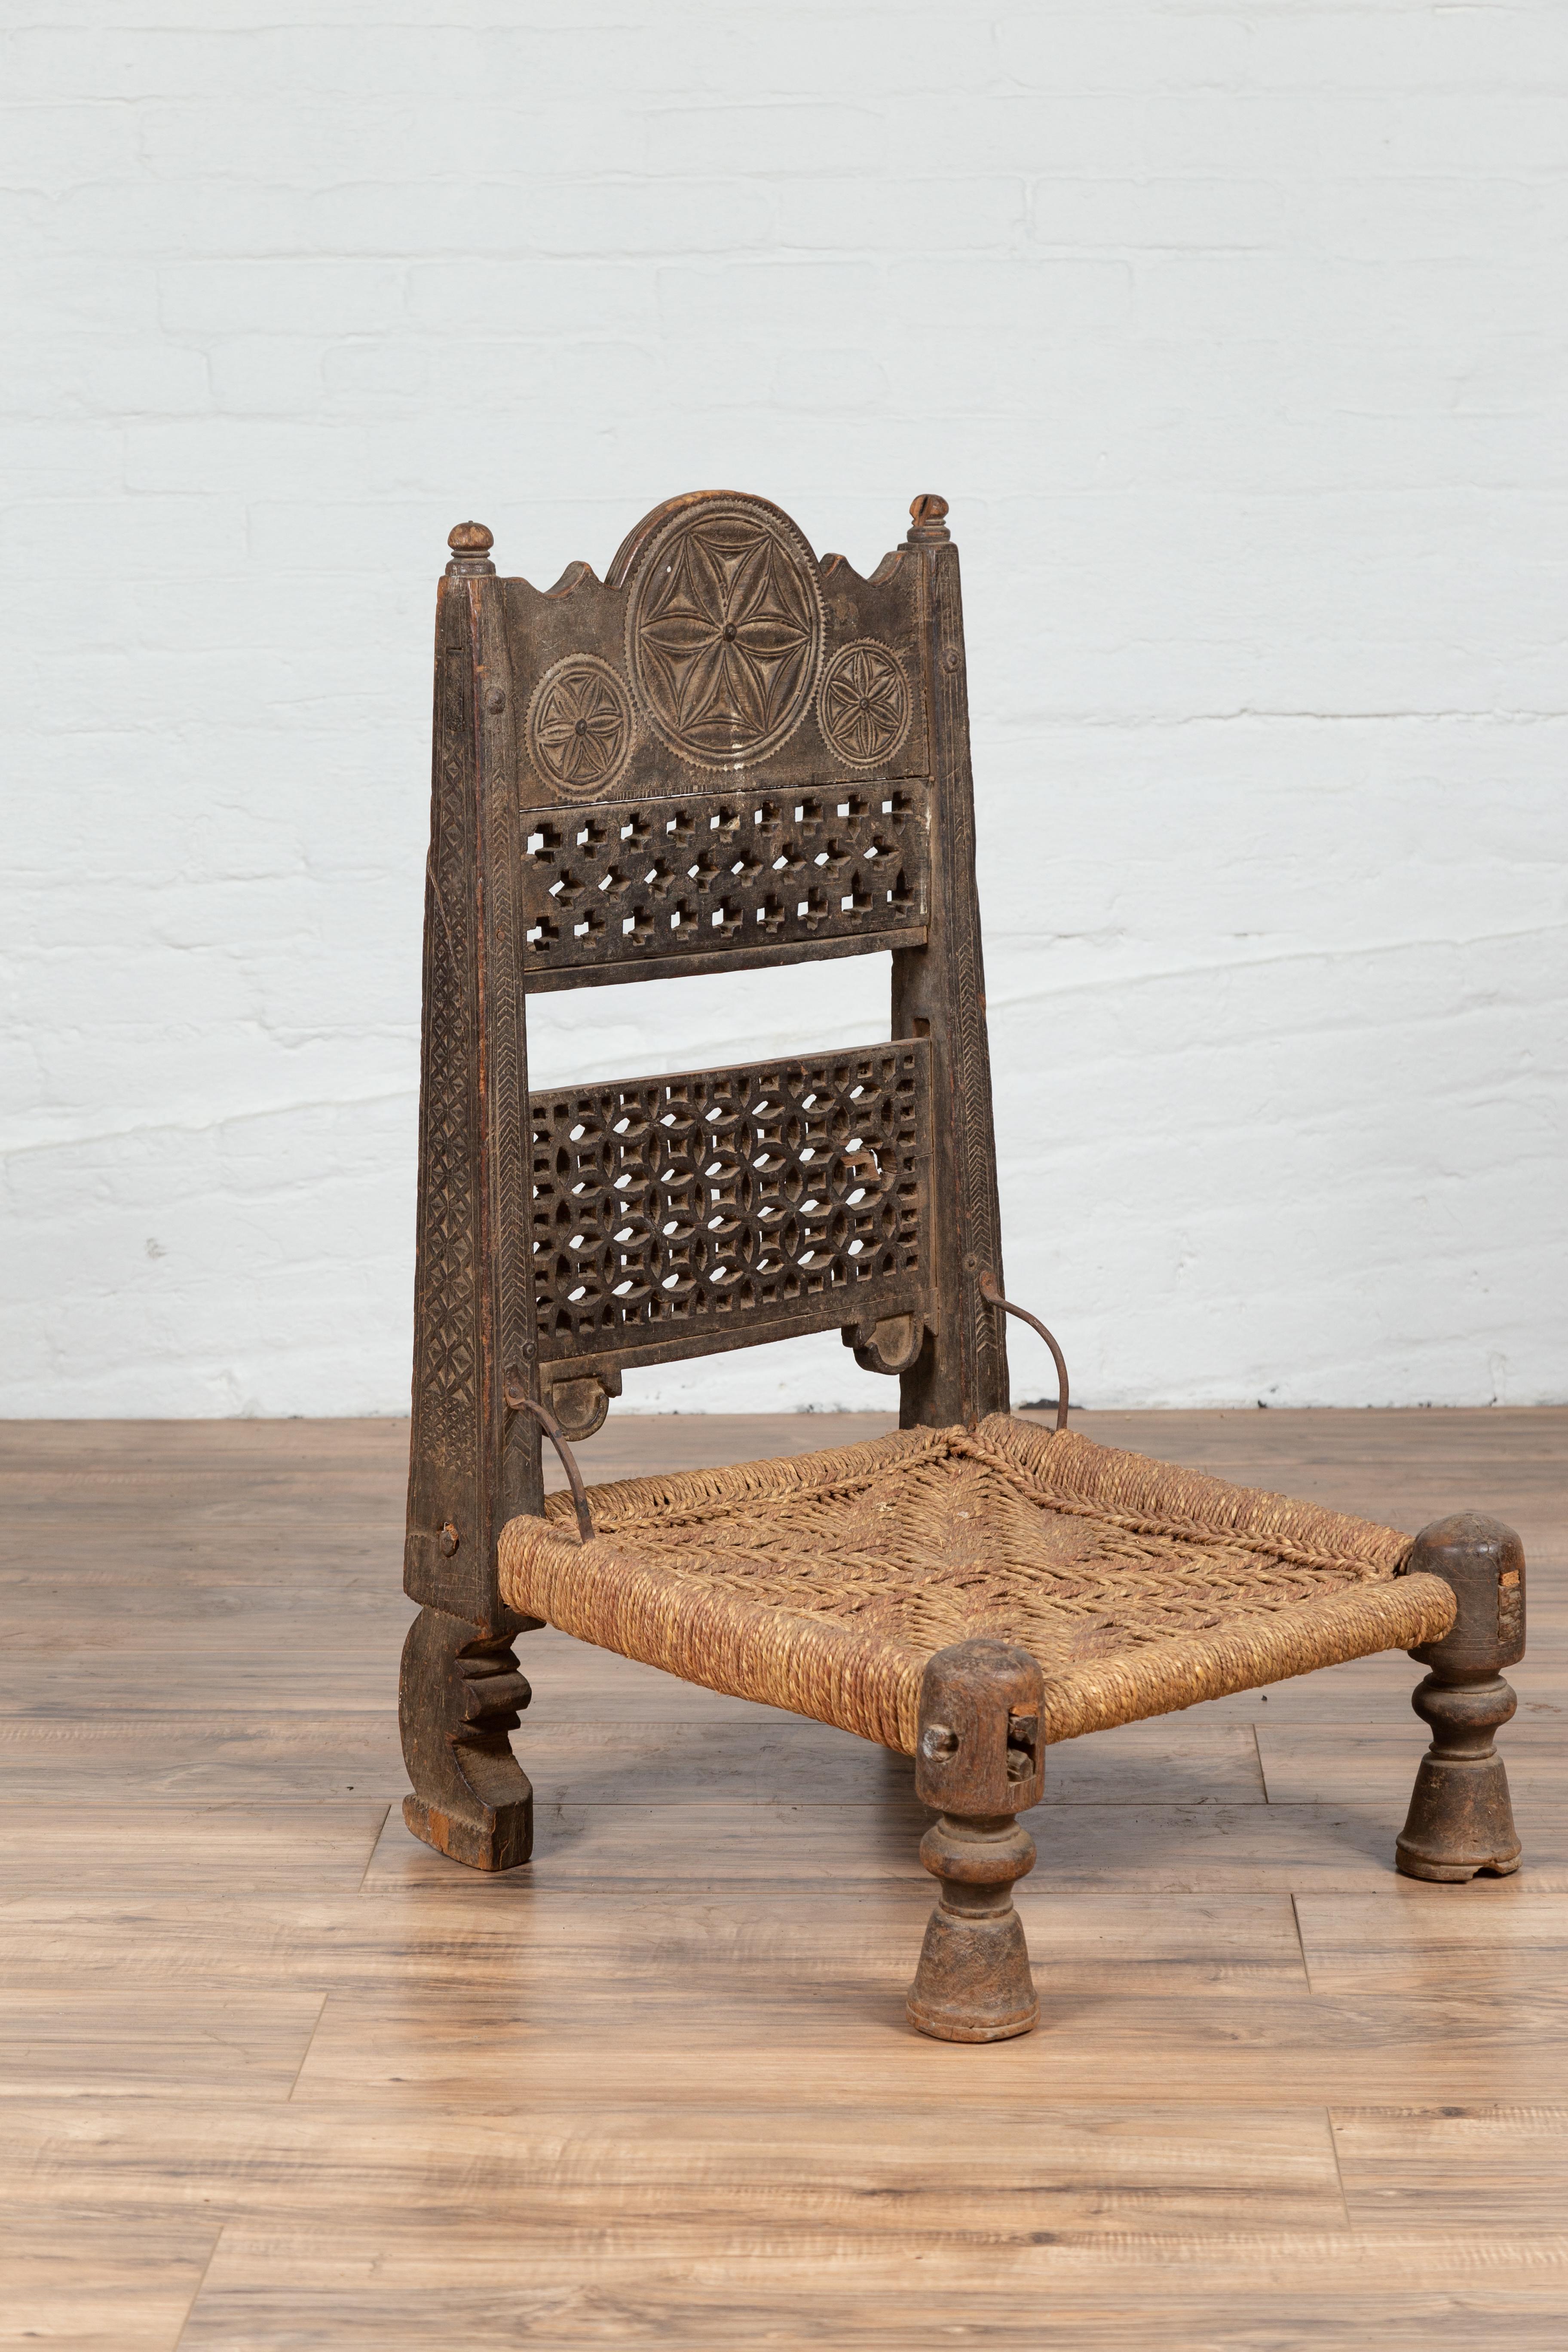 Twine Antique Indian Rustic Low Seat Wooden Chair with Fretwork Accents and Rosettes For Sale